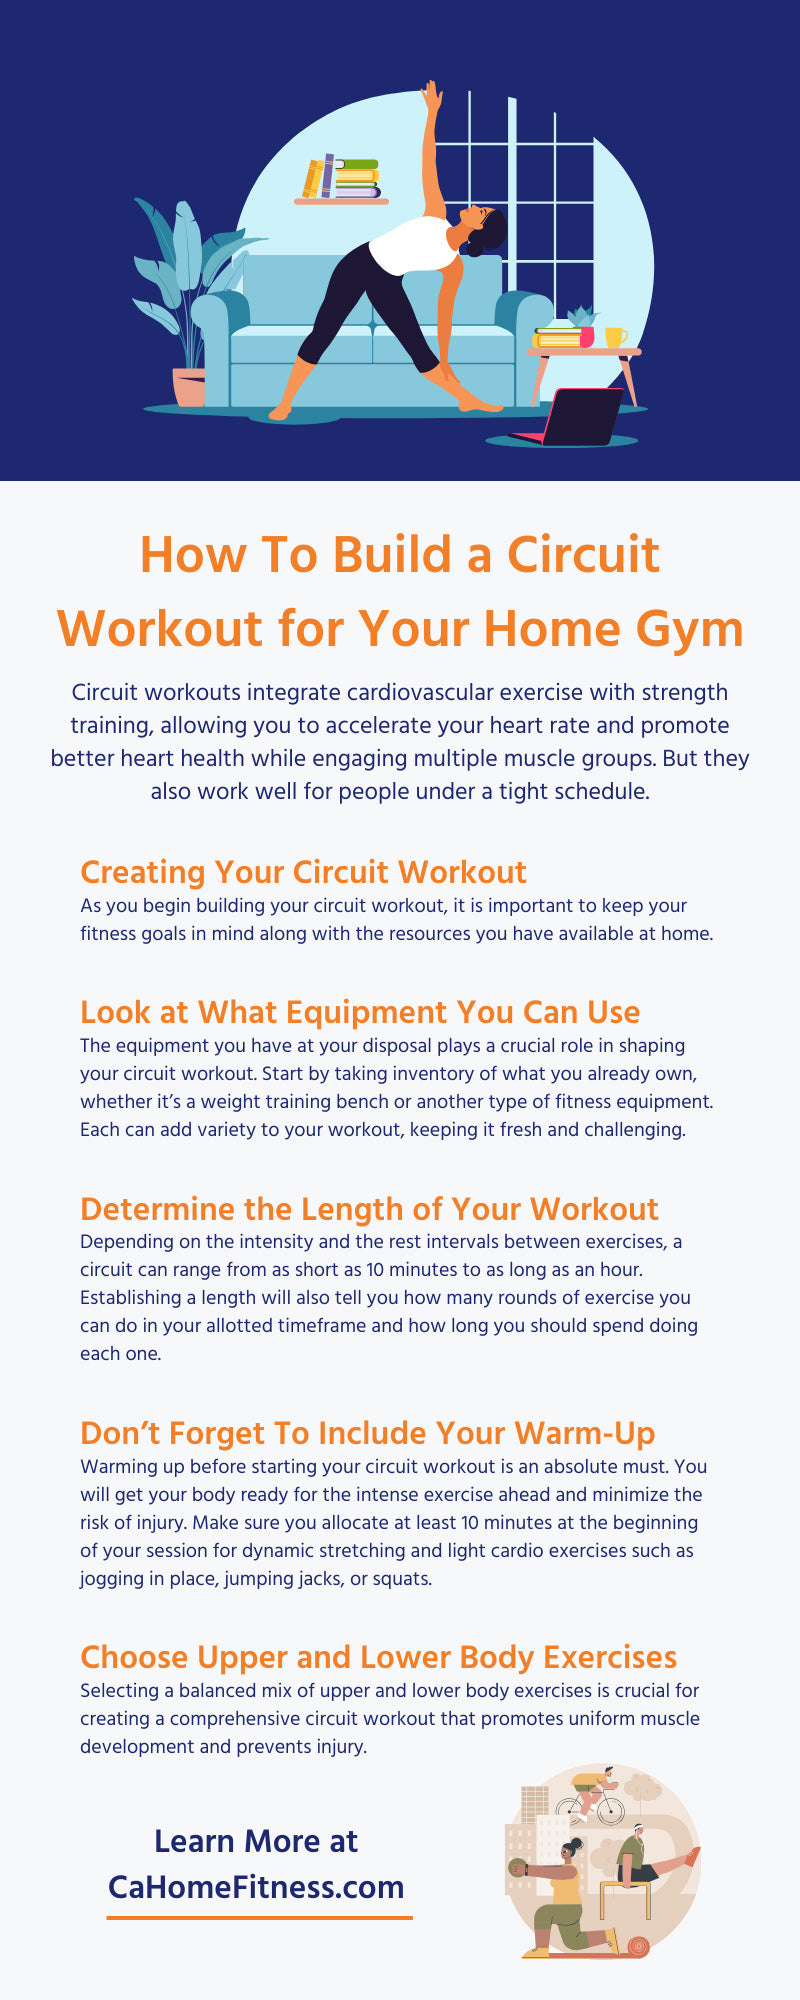 How To Build a Circuit Workout for Your Home Gym